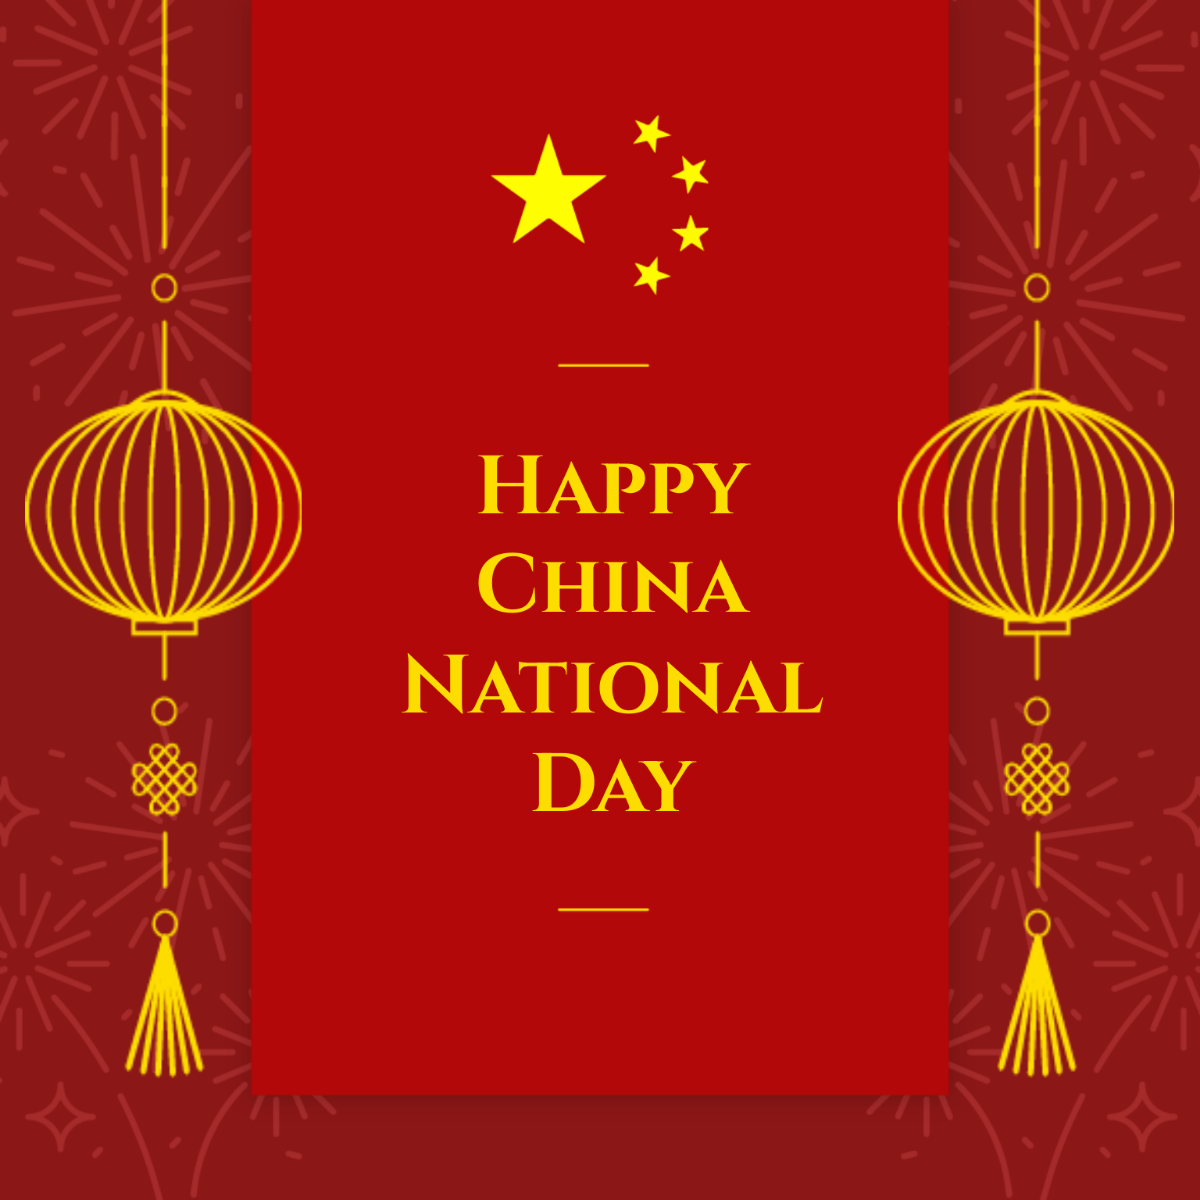 Free China National Day Vector Template